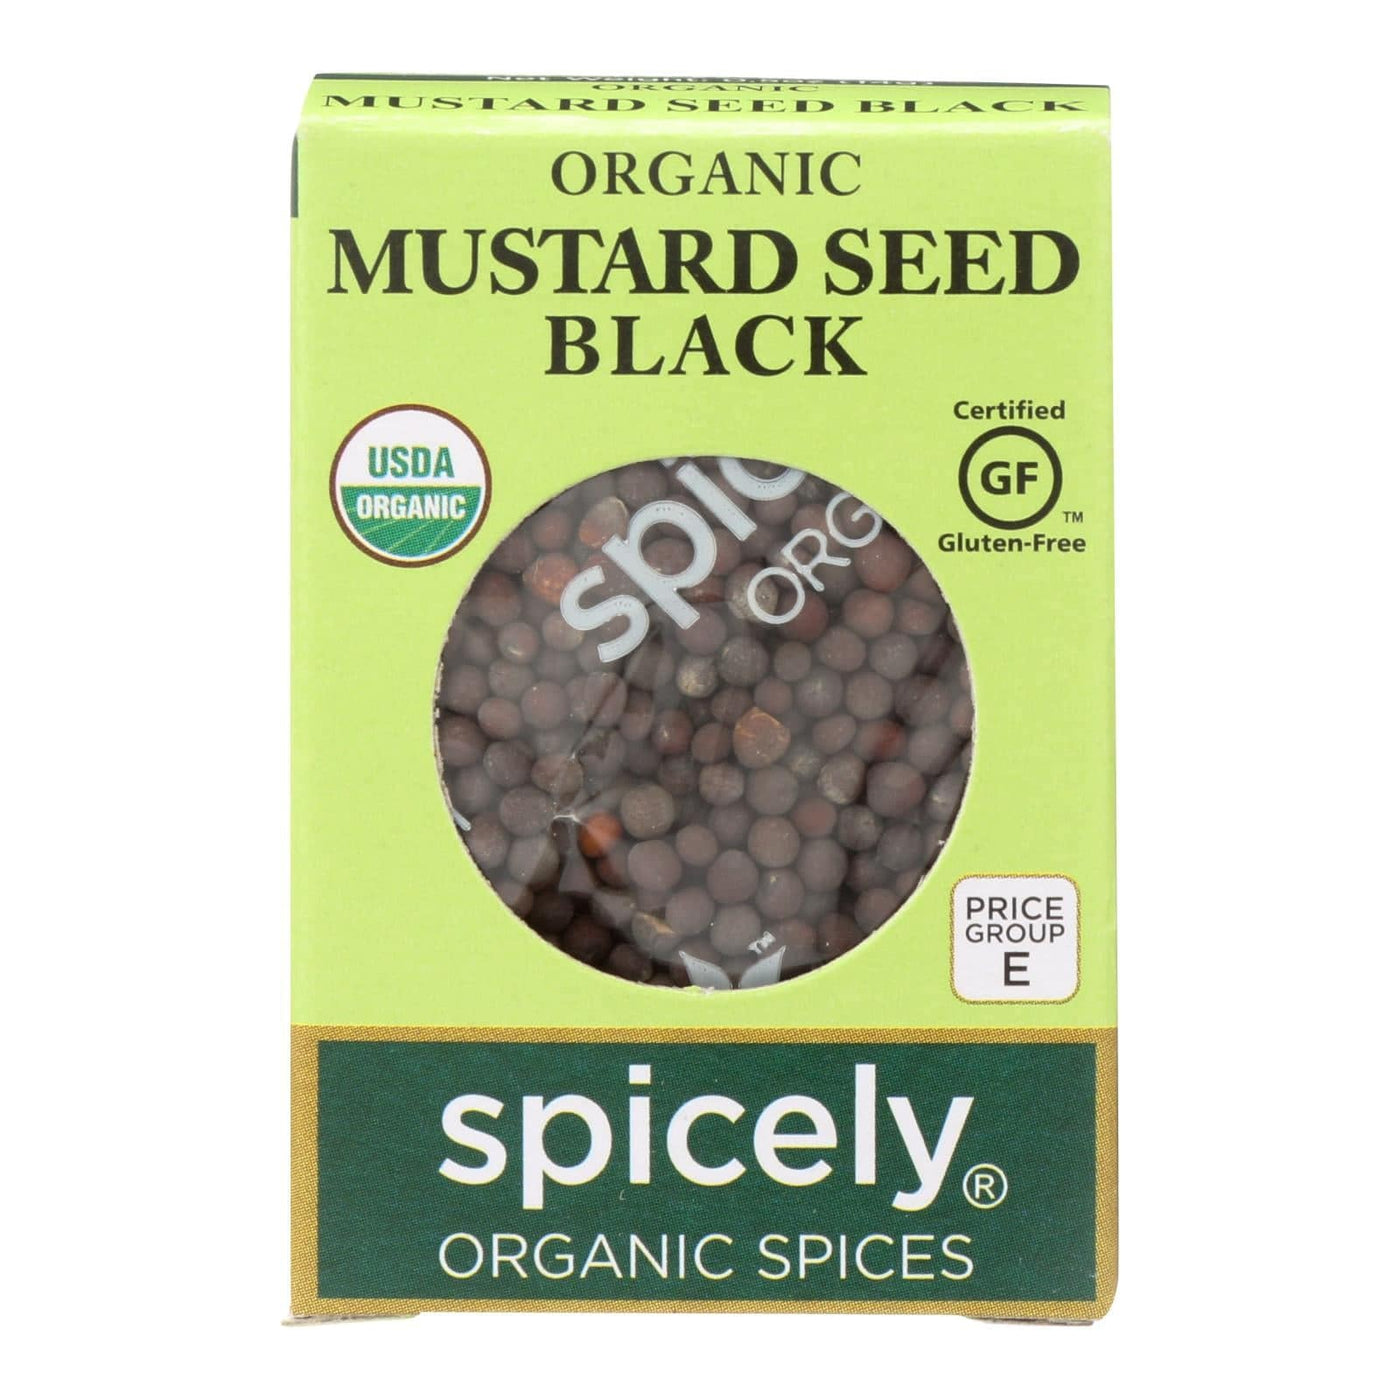 Buy Spicely Organics - Organic Mustard Seed - Black - Case Of 6 - 0.5 Oz.  at OnlyNaturals.us